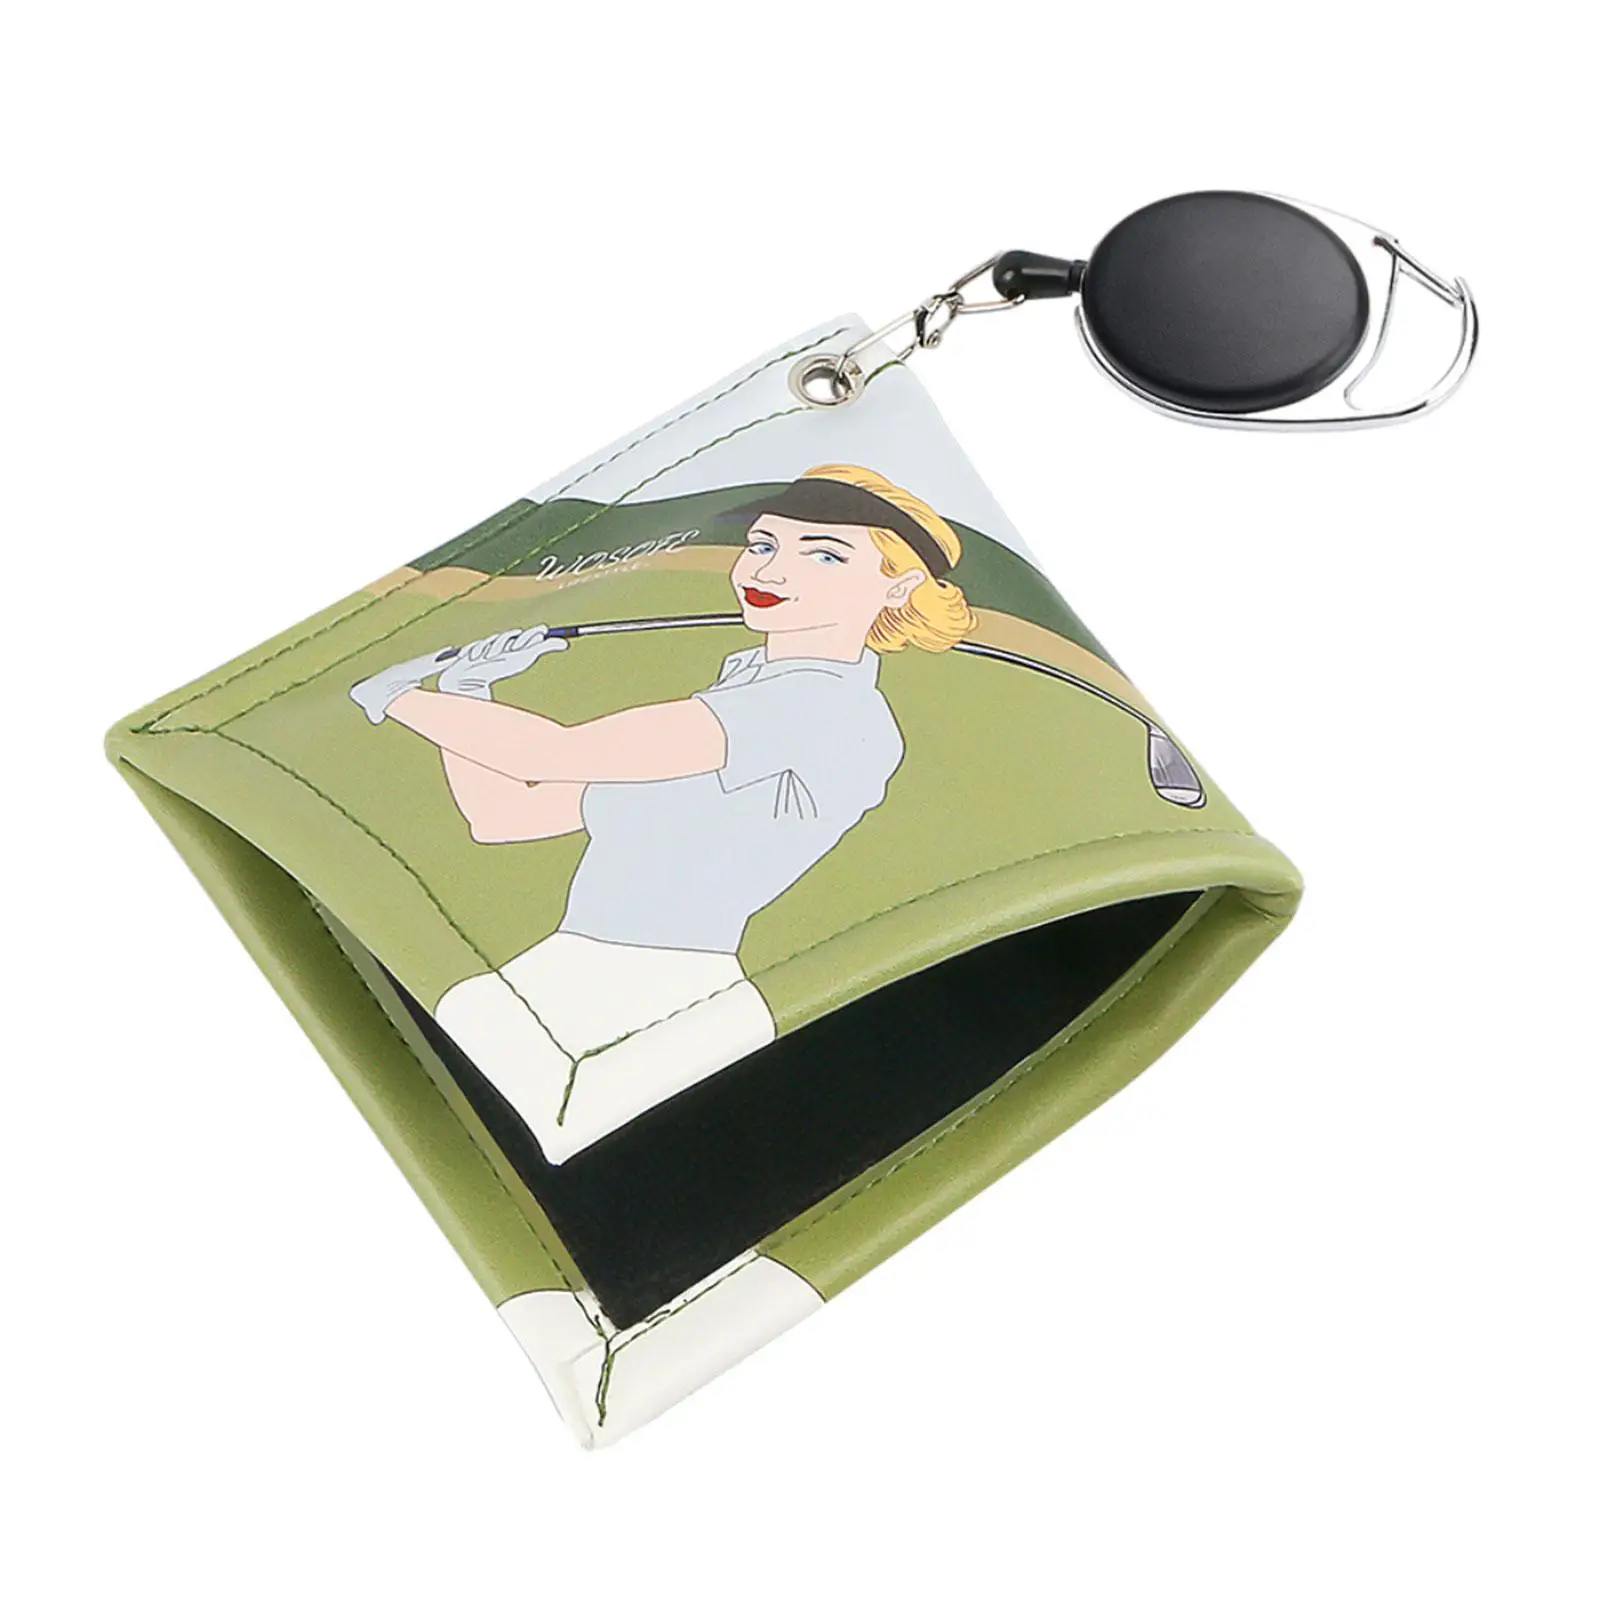 Golf Ball Towel with Retractable Keychain Buckle for Men Women 4.7 x 4.7 inch Golf Ball Cleaning Towel Golf Ball Cleaner Pocket